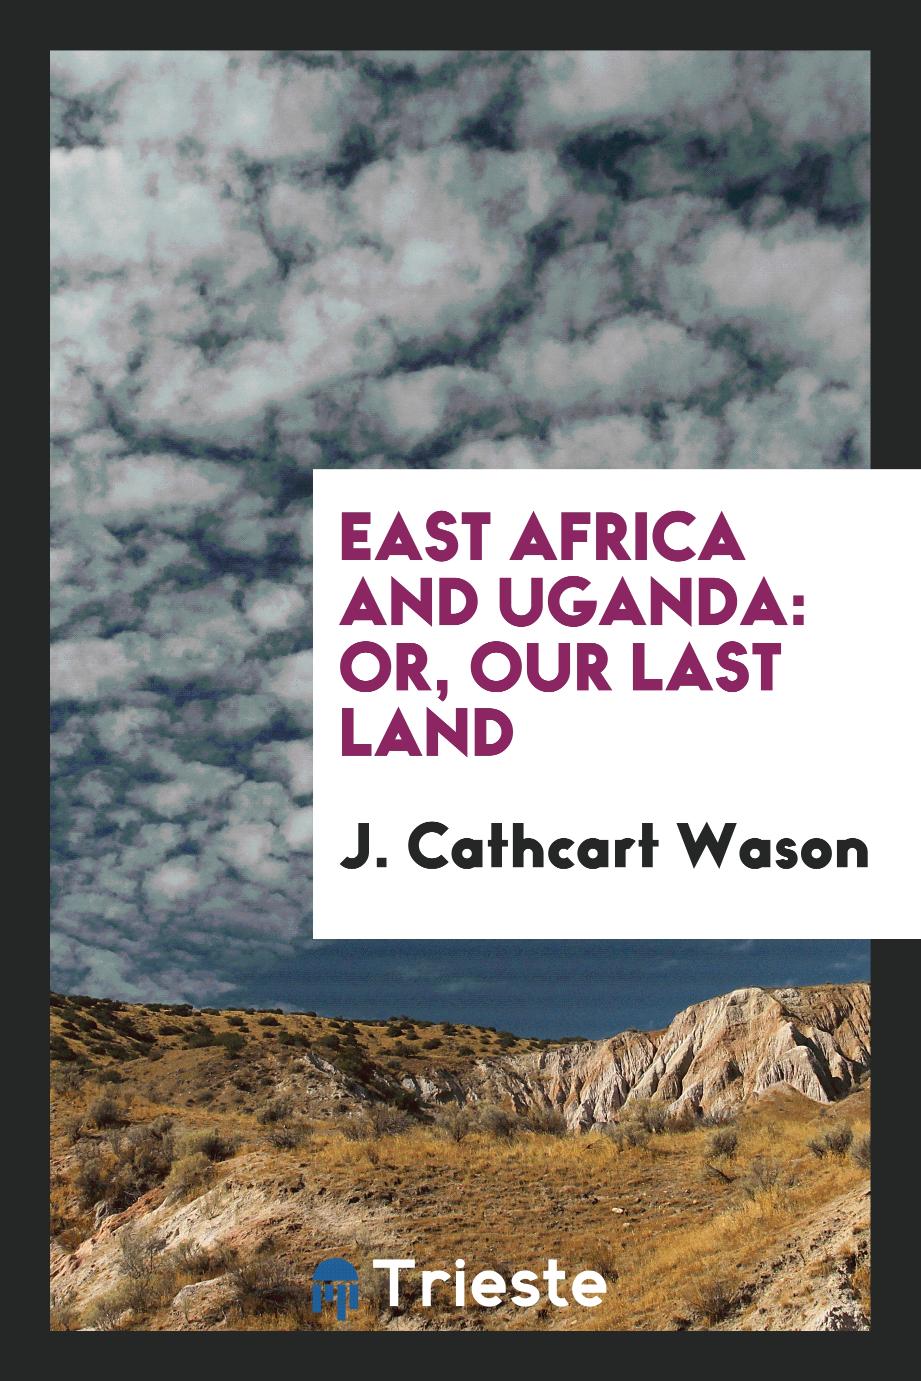 East Africa and Uganda: Or, Our Last Land